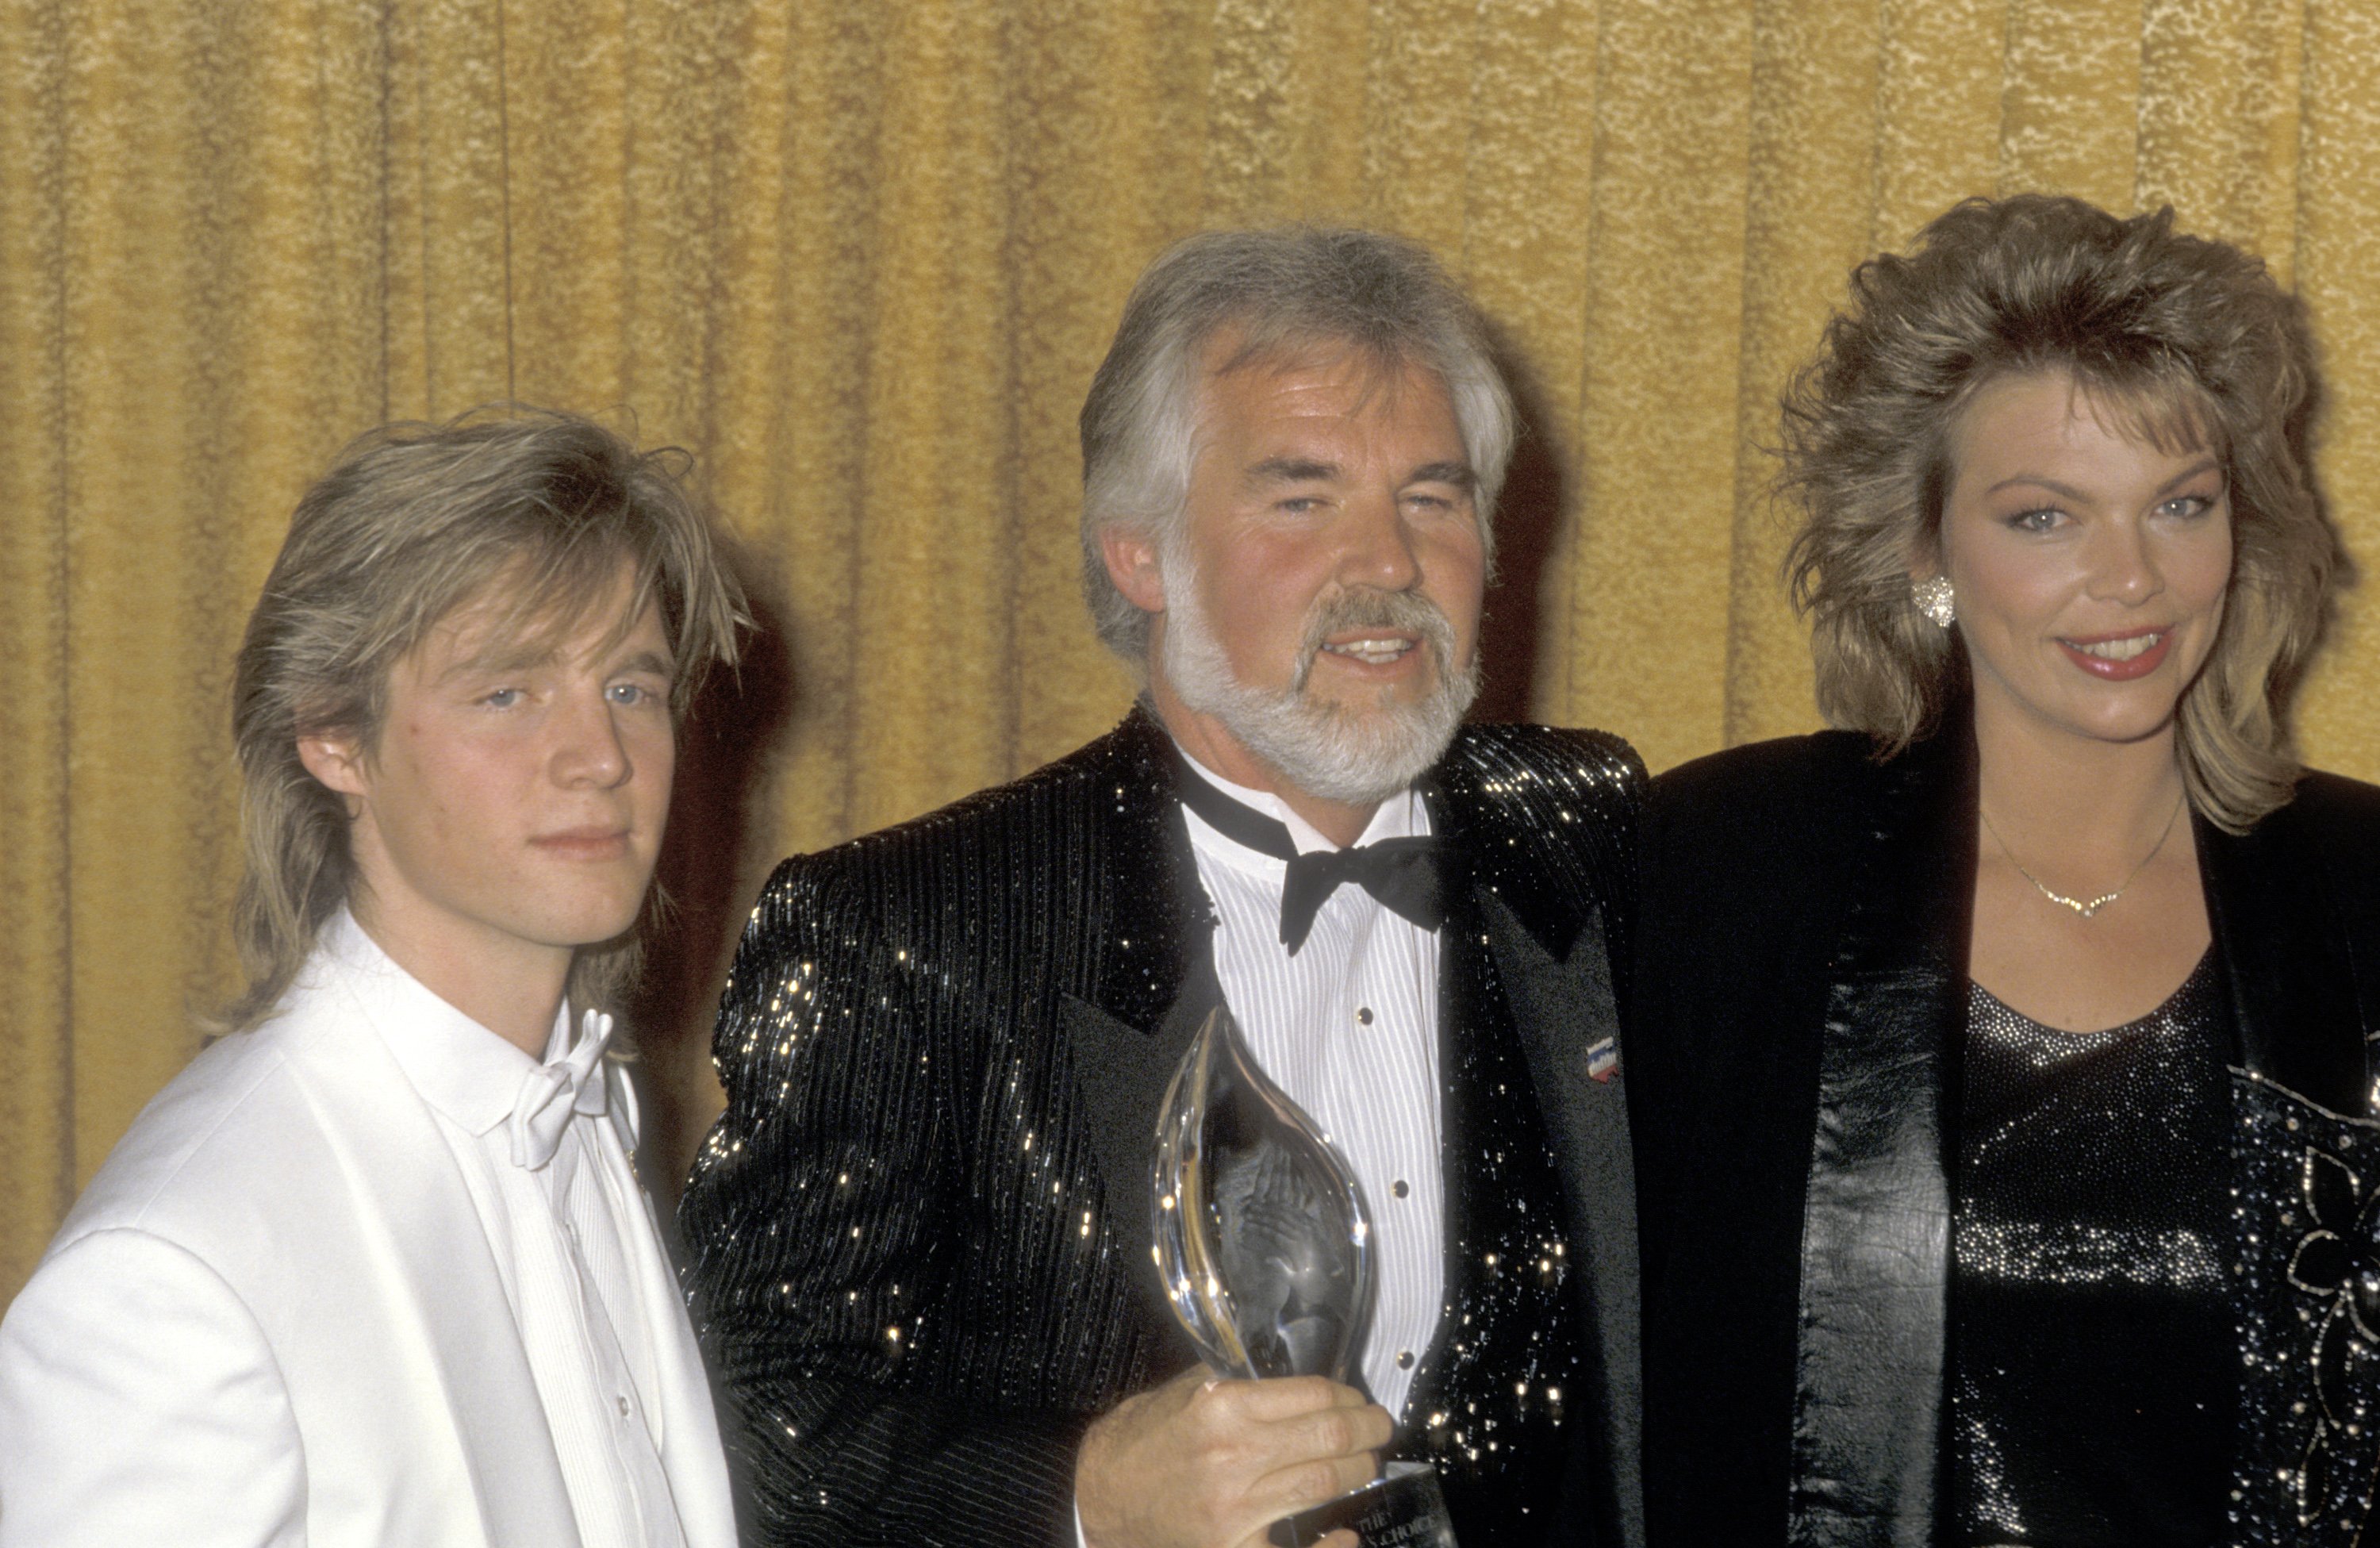 Musician Kenny Rogers, son Kenny Rogers Jr. and daughter Carole Rogers attend the 12th Annual People's Choice Awards on March 11, 1986 at Santa Monica Civic Auditorium in Santa Monica, California.  |  Source: Getty Images